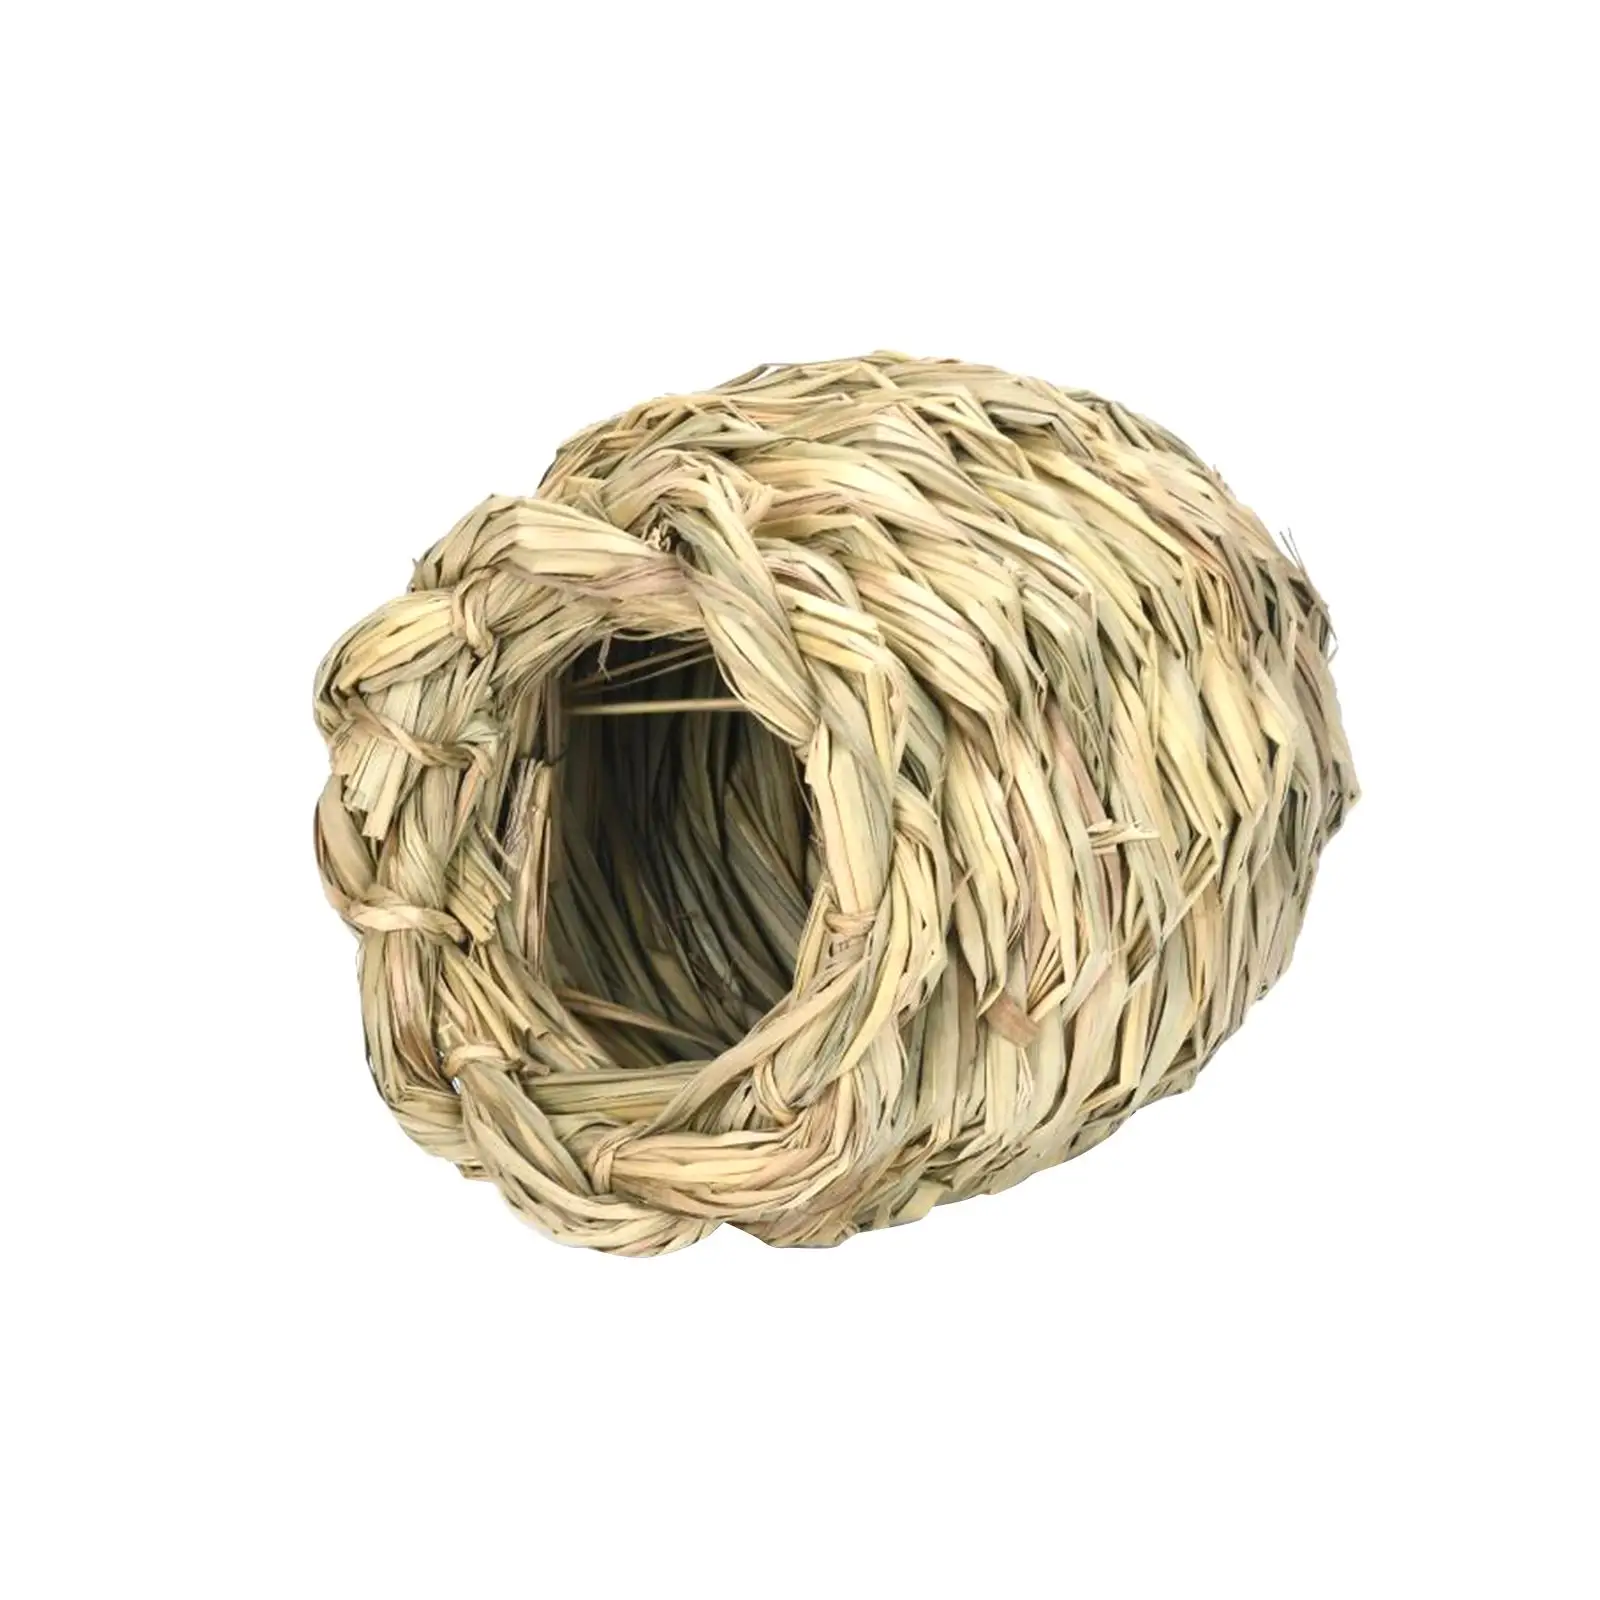 Rabbit Grass House Bed Hanging Straw Cage Nest Hideaway Hut Rest Room Tube Chew